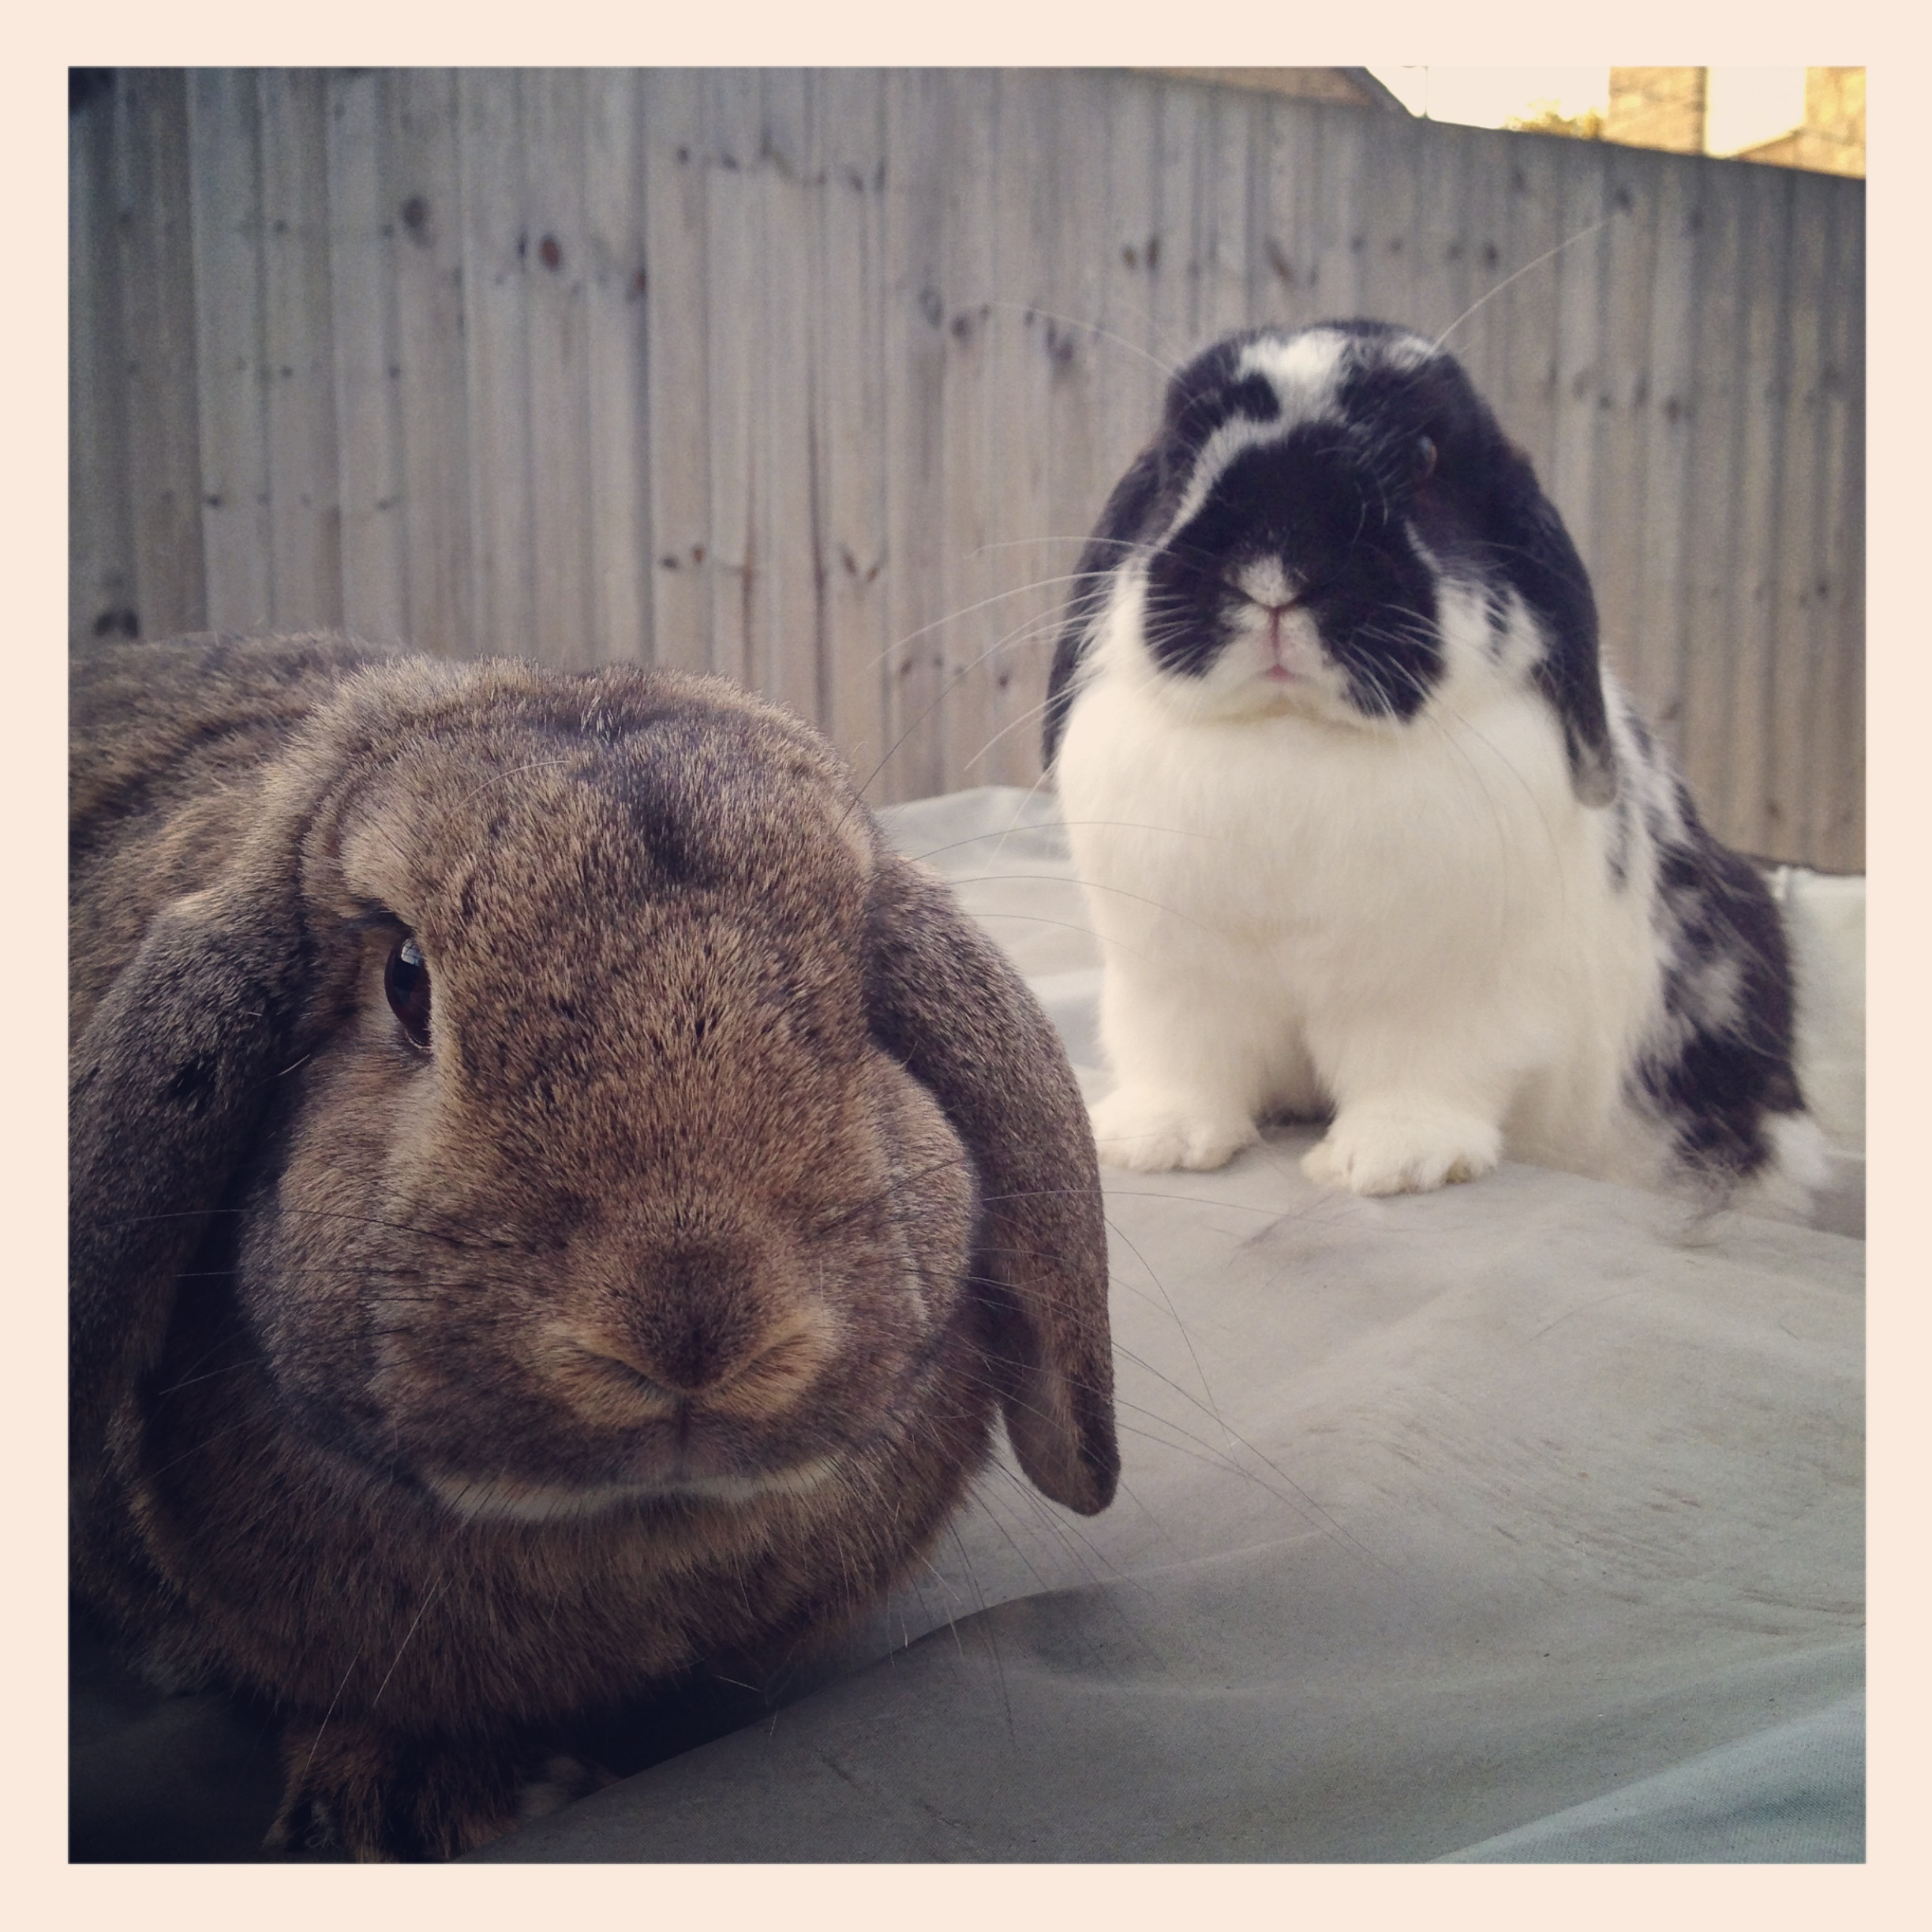 Looks Like You're in the Wrong Neighborhood, Human. Now Give Us All Your Carrots!